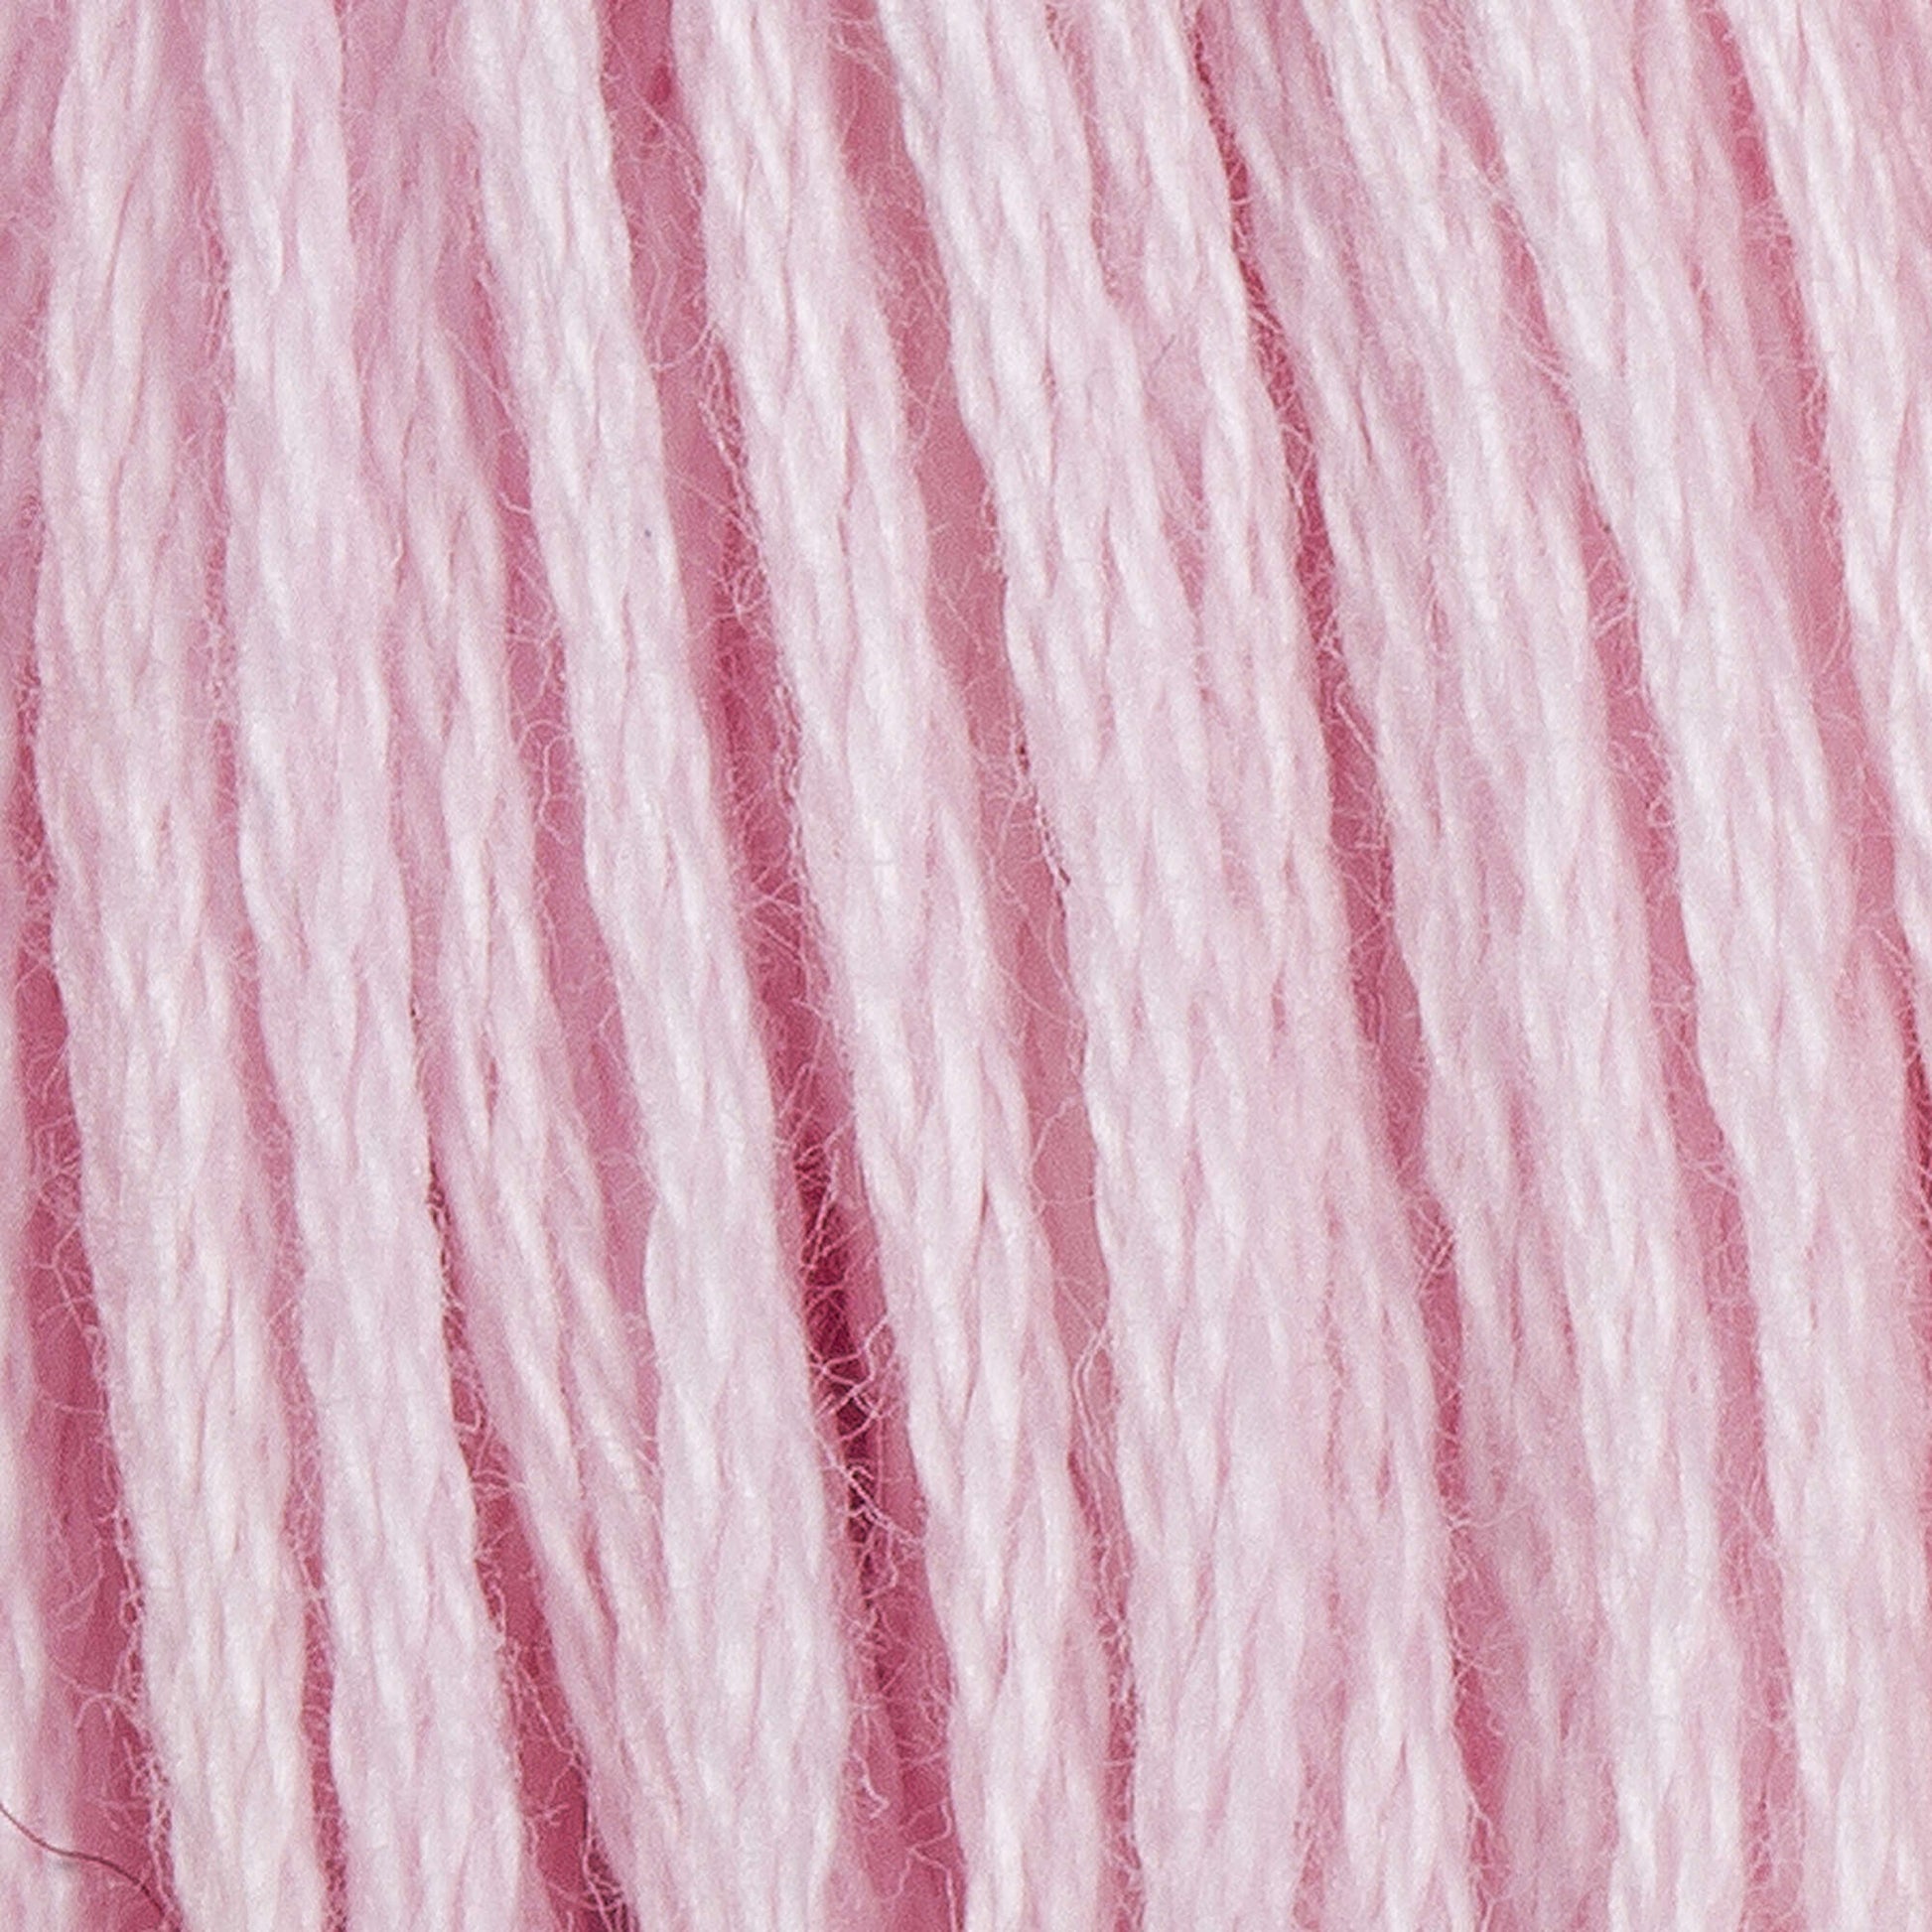 Coats & Clark Cotton Embroidery Floss Dusty Rose Very Light